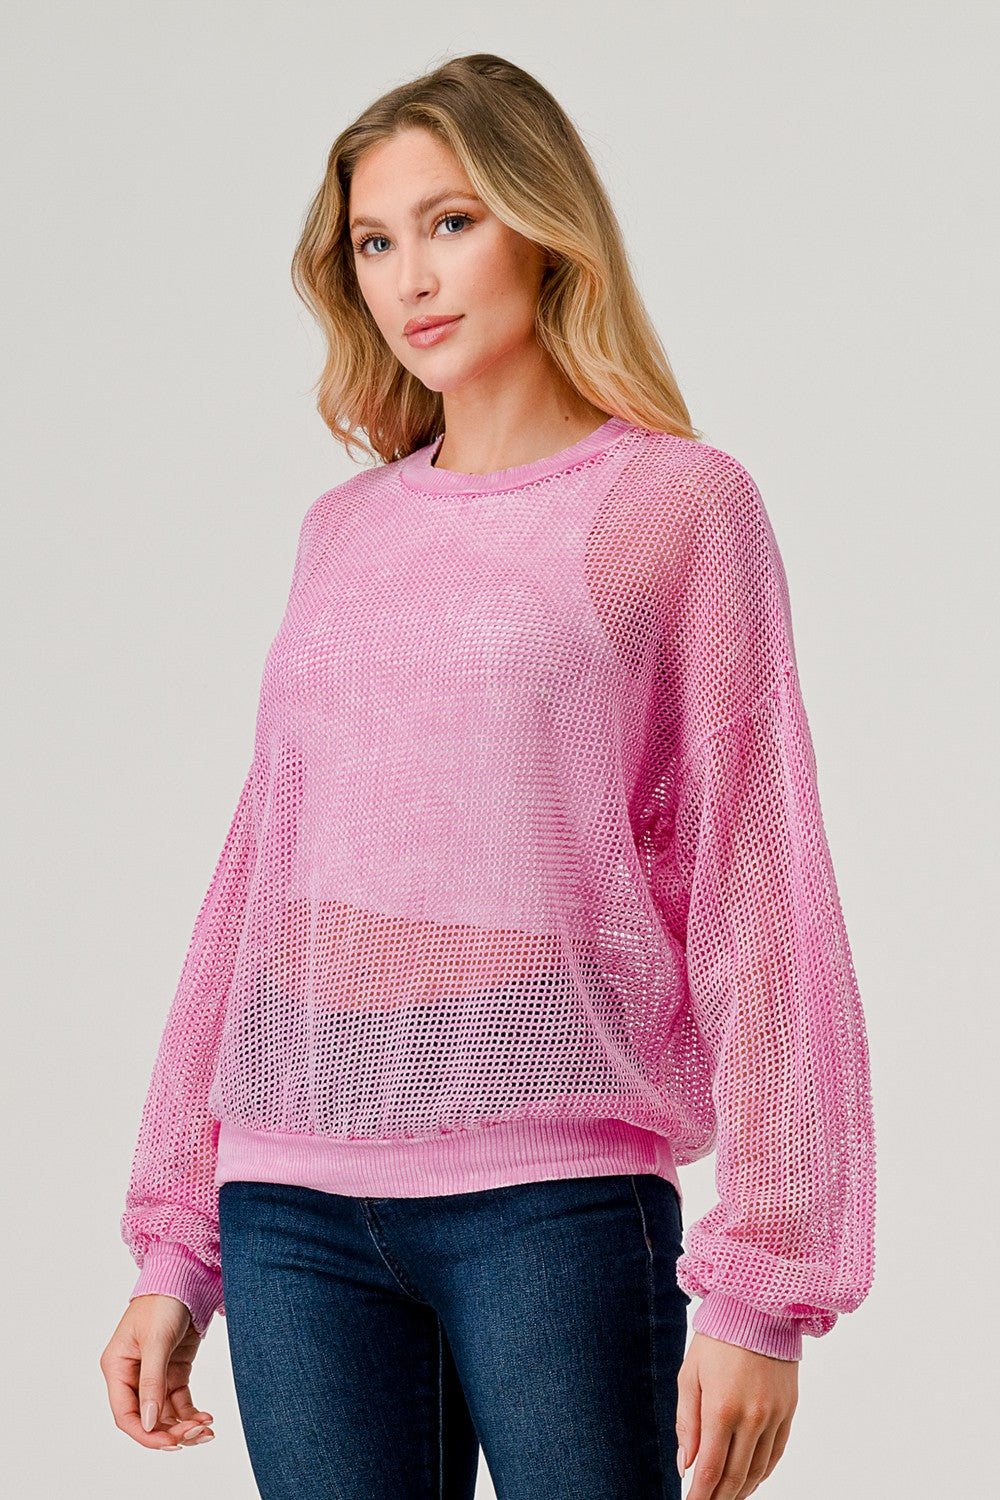 HASHTTAG PINK MINERAL WASHED MESH TOP